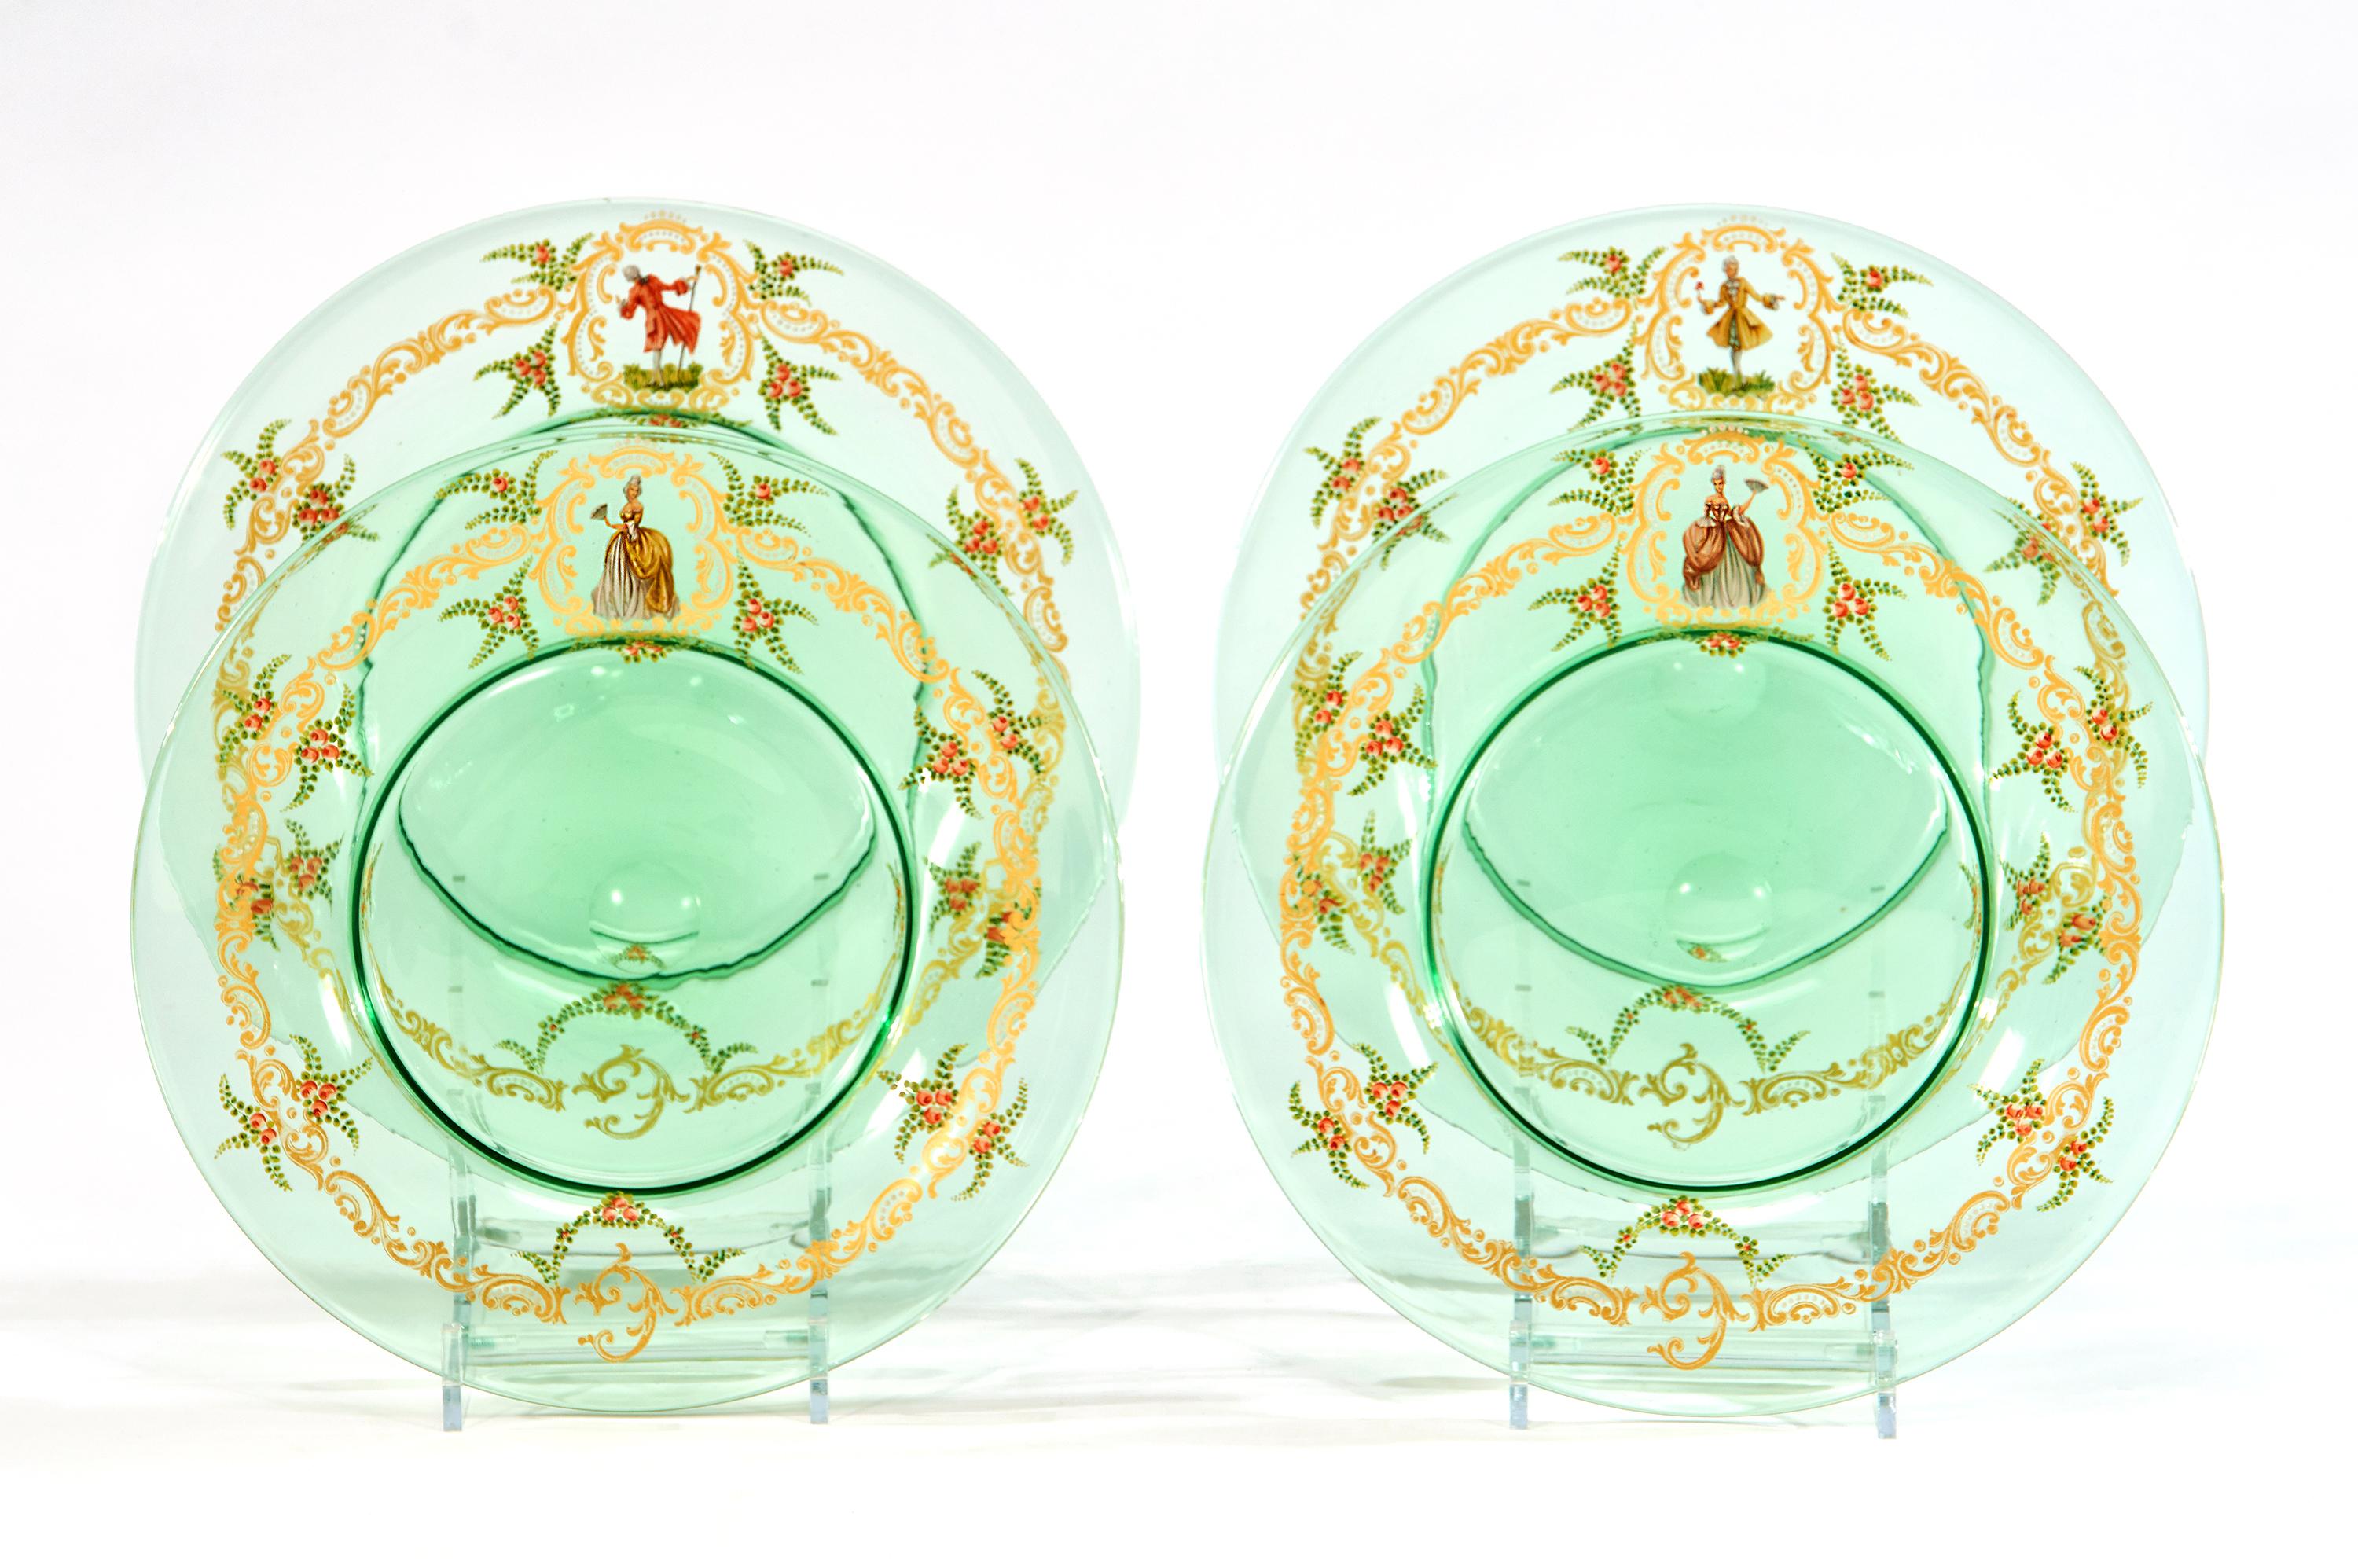 12  Venetian Glass Green Dinner Plates W/ Hand Painted Enamel Gilt Decoration In Good Condition For Sale In Great Barrington, MA